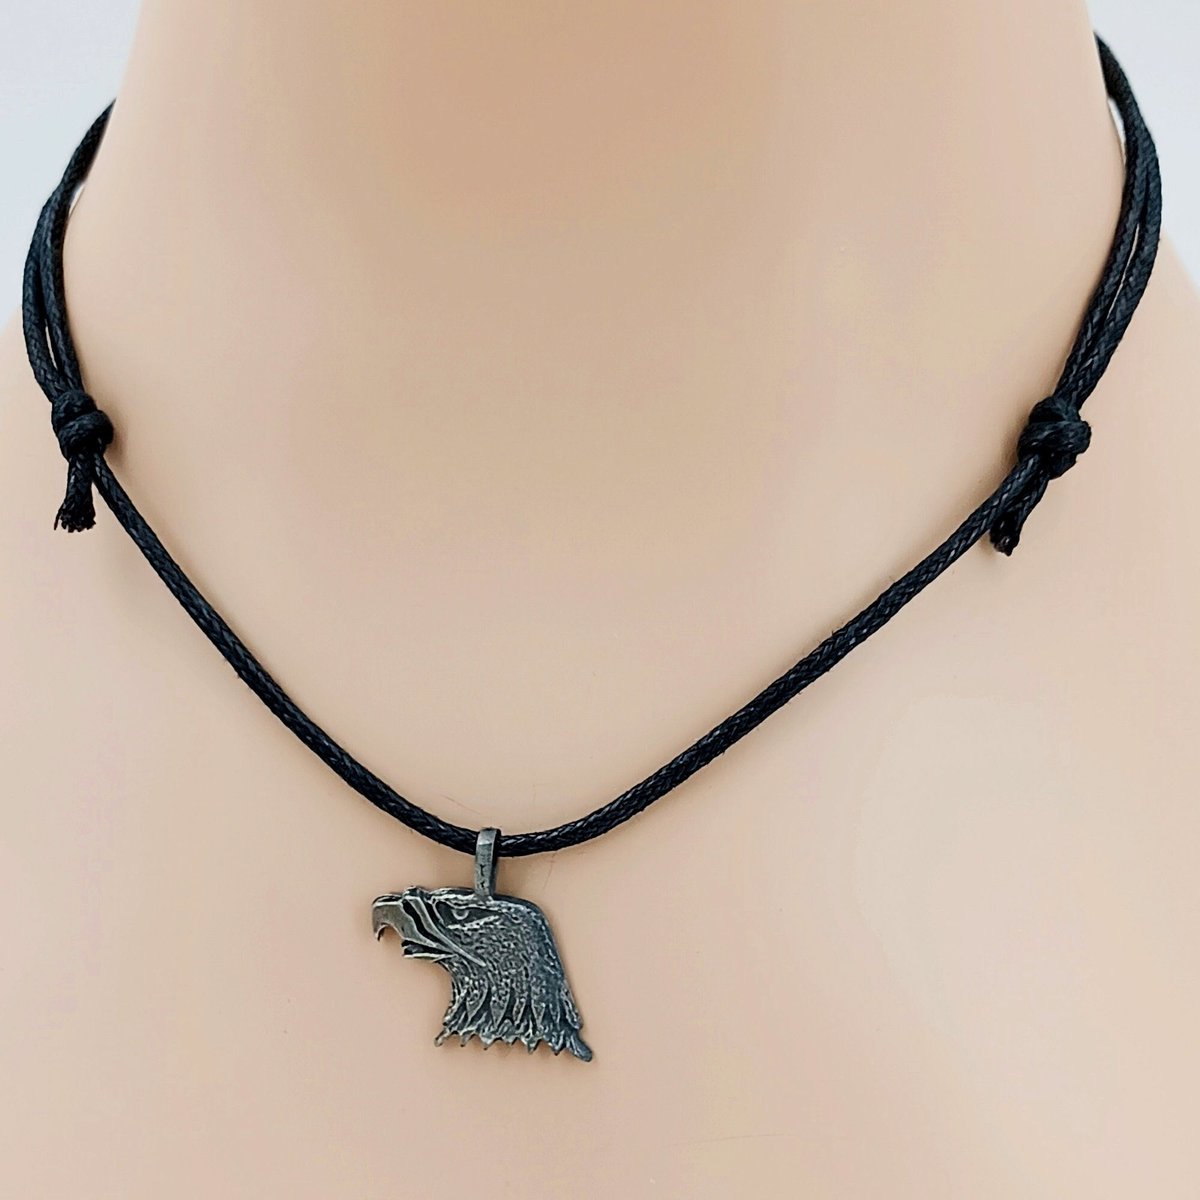 Eagle Head Pewter Pendant on Adjustable Cord Necklace Youth to Adult Bird of Prey Jewelry 9001-EagleHead #MinimalNecklace #SilverNecklace 
$12.00
➤ grassshacktrading.etsy.com/listing/167417…